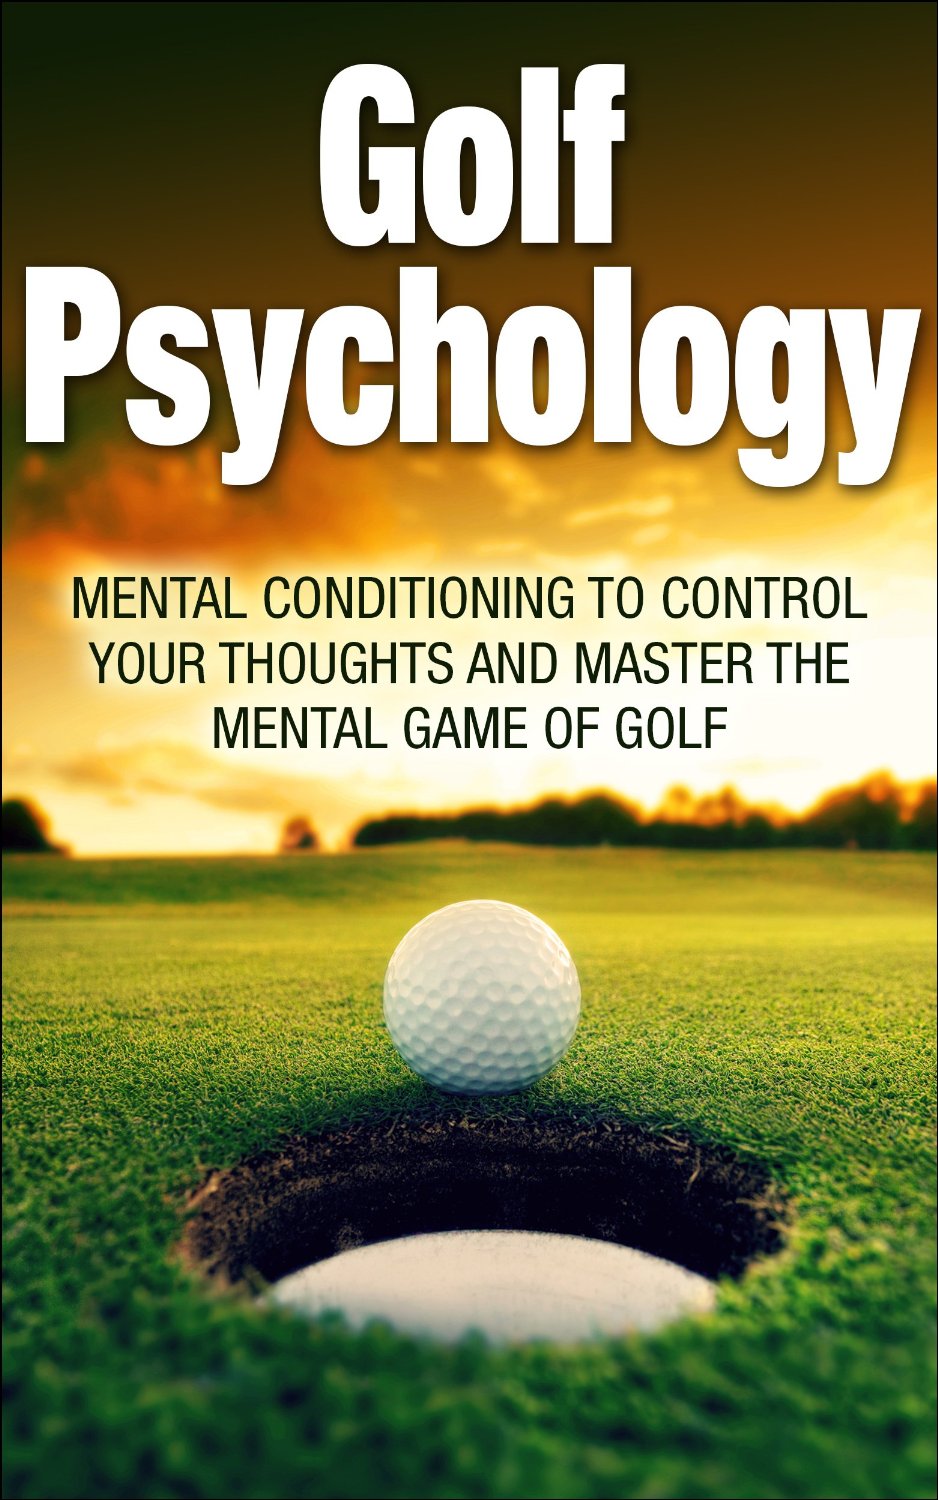 Golf Psychology: Mental Conditioning to Control Your Thoughts and Master the Mental Game of Golf by Daniel Jones